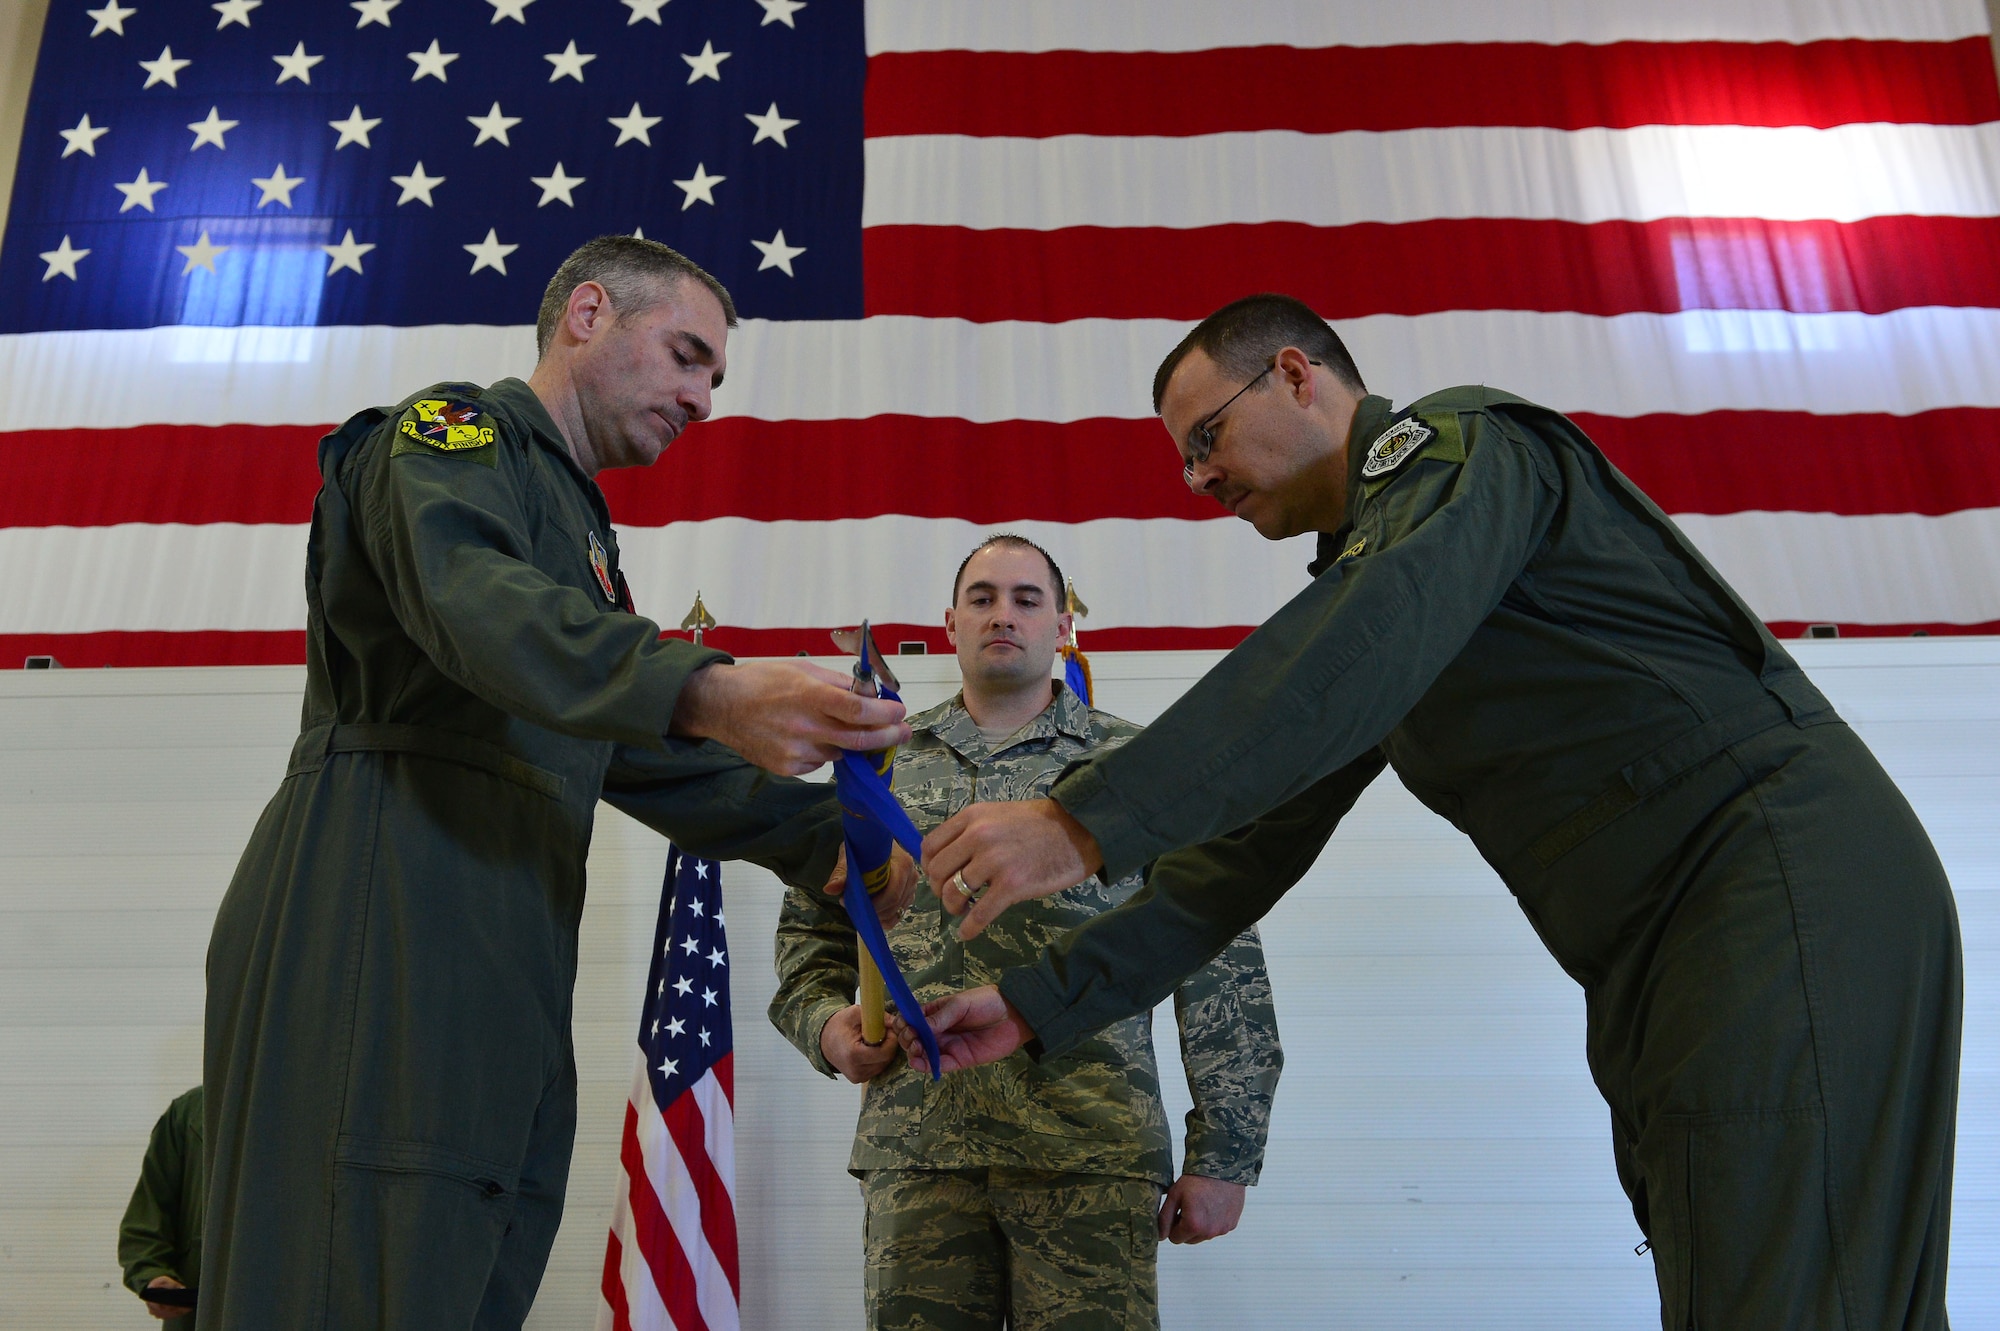 Col. Joseph, 432nd Operations Group commander and Lt. Col. Nicholas, 15th Attack Squadron commander case the 15th Expeditionary ATKS guidon March 9, 2018, at Creech Air Force Base, Nev. The final MQ-1 Predator combat line was flown in an undisclosed area of responsibility by Airmen of the 15th ATKS during the official MQ-1 retirement ceremony. (U.S. Air Force photo by Airman 1st Class Haley Stevens)